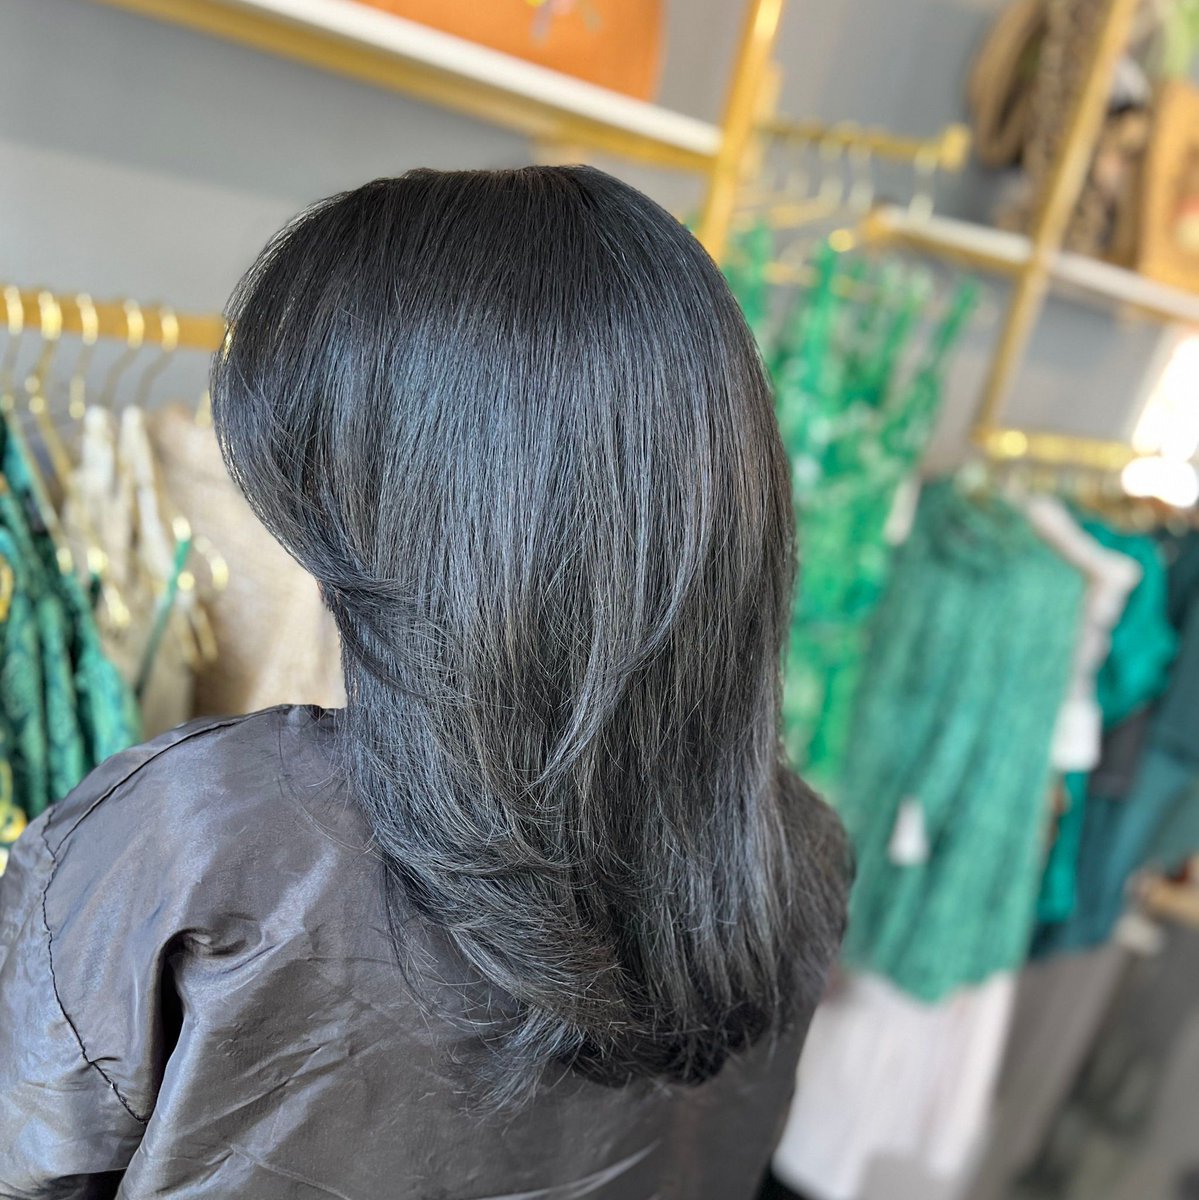 Sureni was getting married in a week! Jessi made sure to freshen up her cut & color so her hair will be wedding ready! Congratulations Sureni! 

#tomballhairstylists #nbrextensions #woodlandshairstylists #thewoodlandstx #houston #conroehairsalon #oribe #luxuryhair #thewoodlands